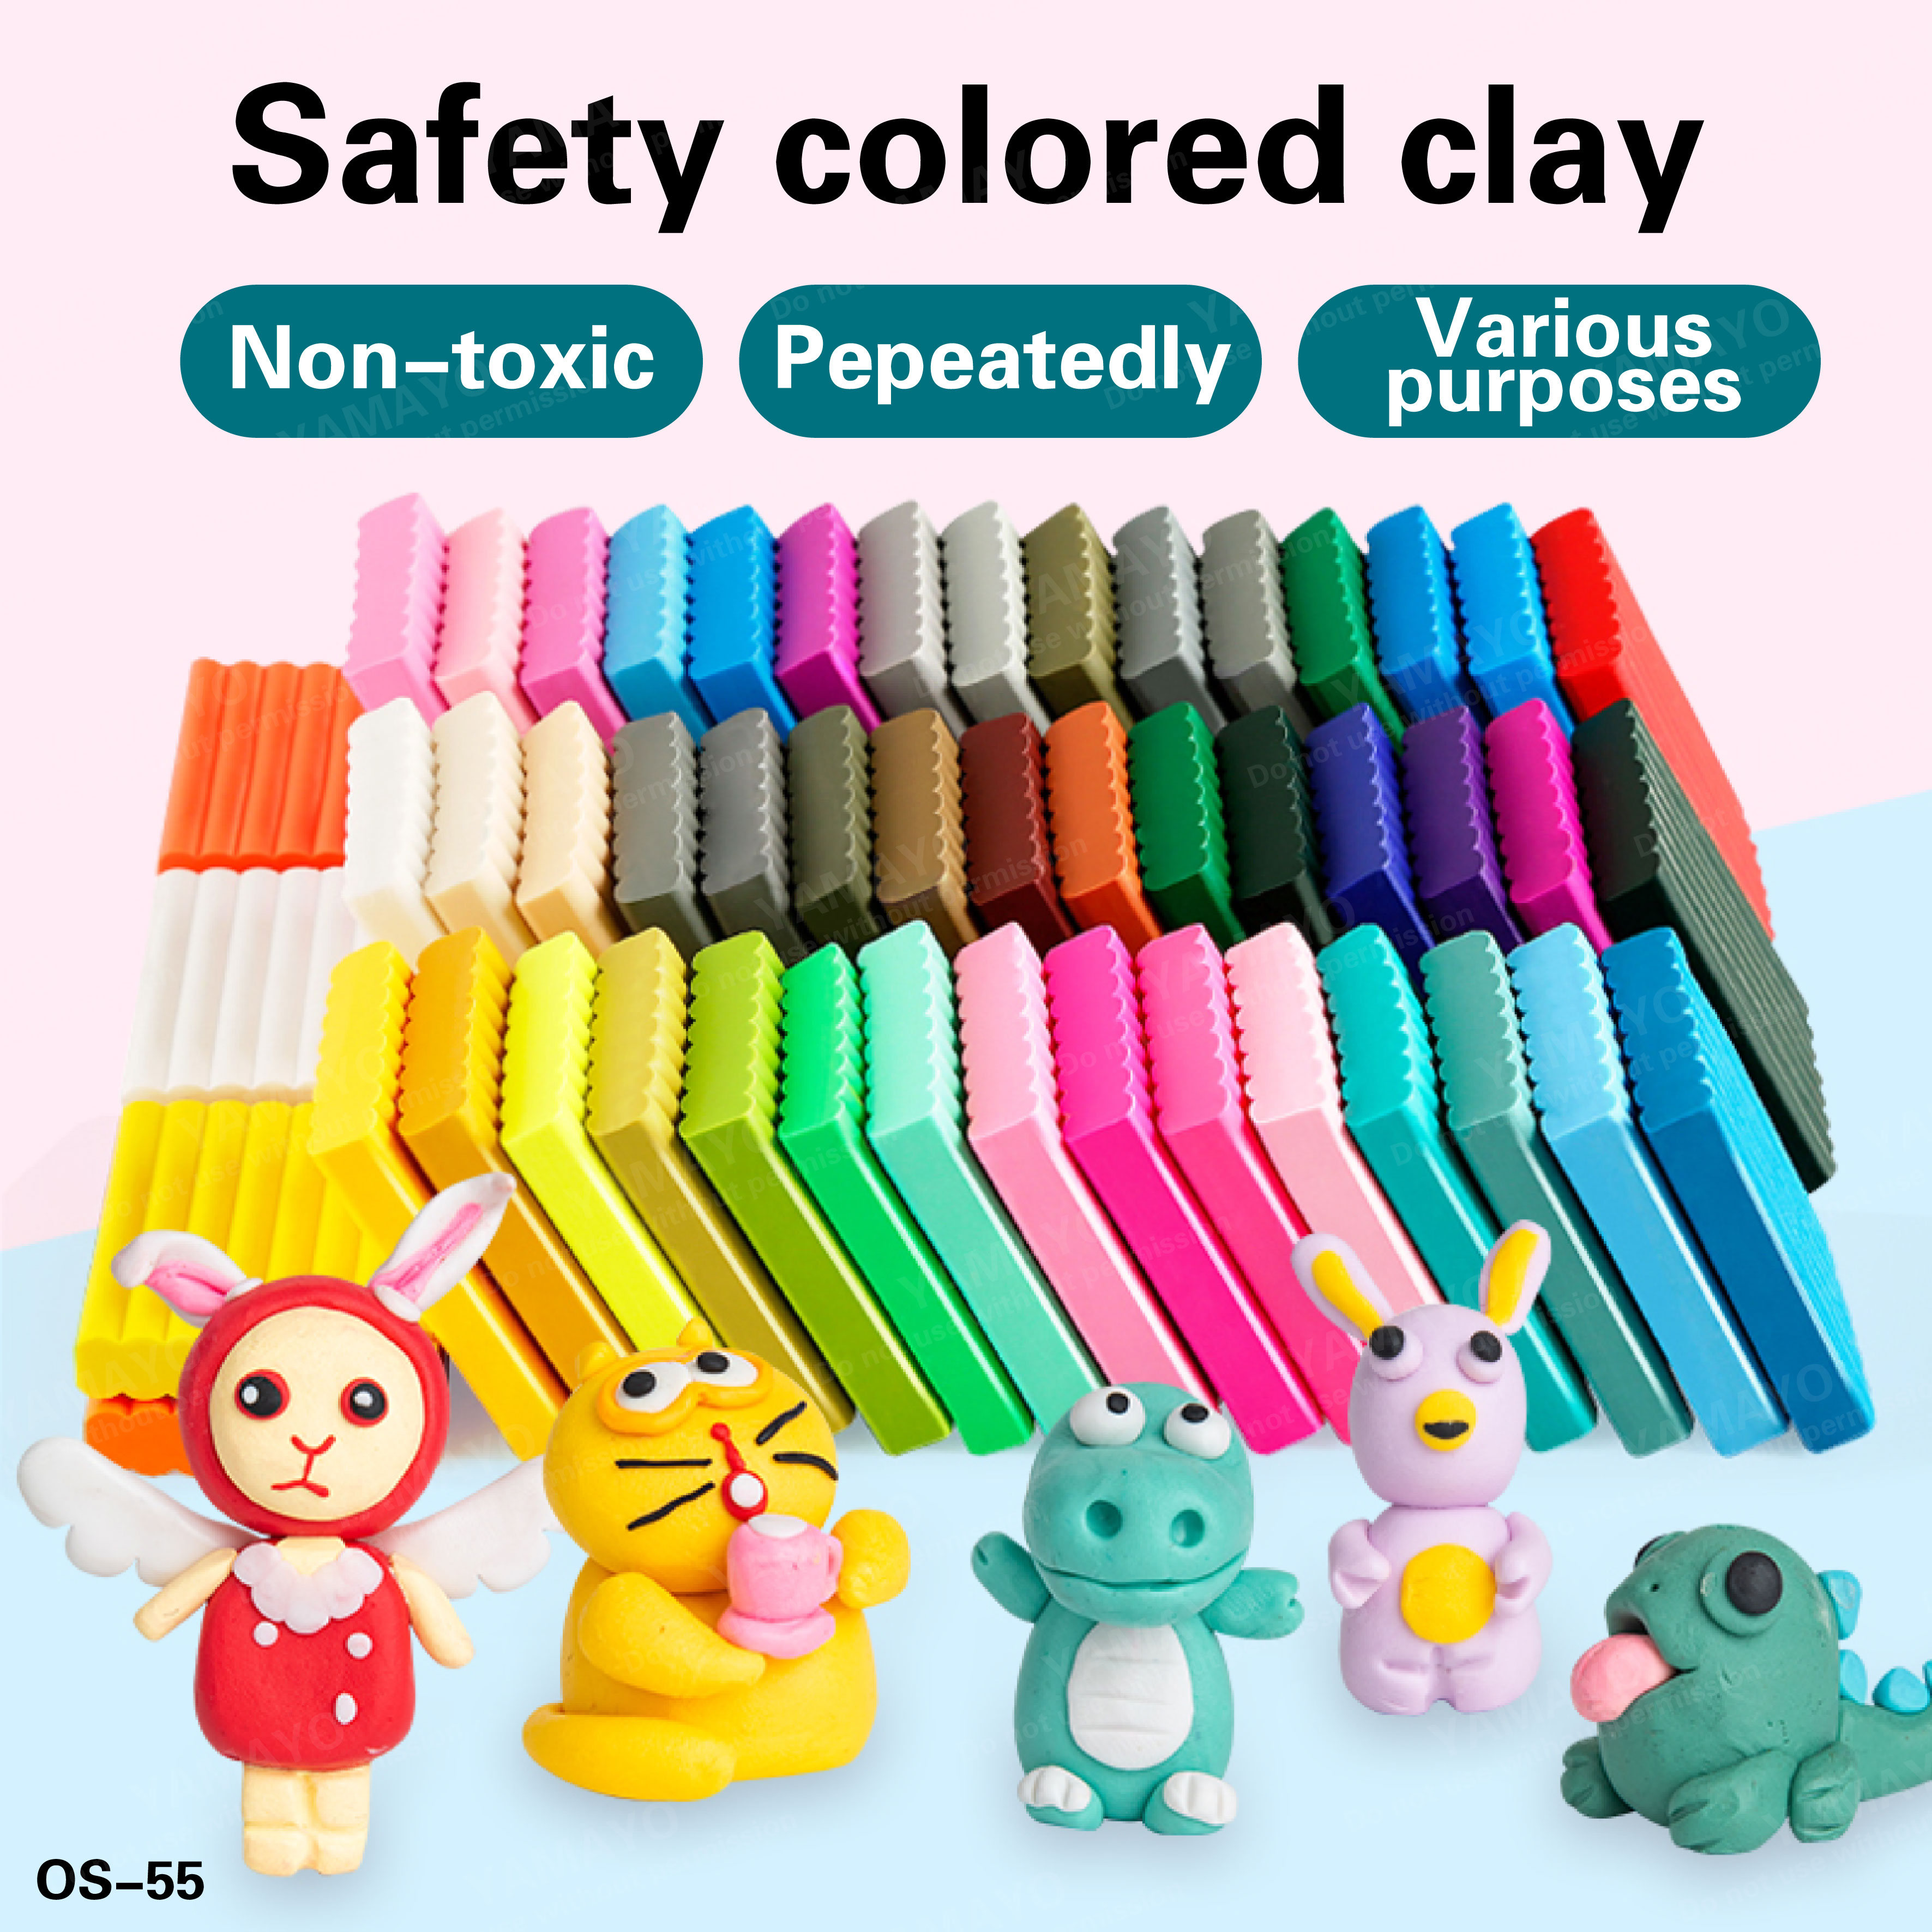 24 Colors Air Dry Clay,DIY Creative Modeling Clay,Light DIY Clay with Tools  for Art Crafts,Best Gift for Kids